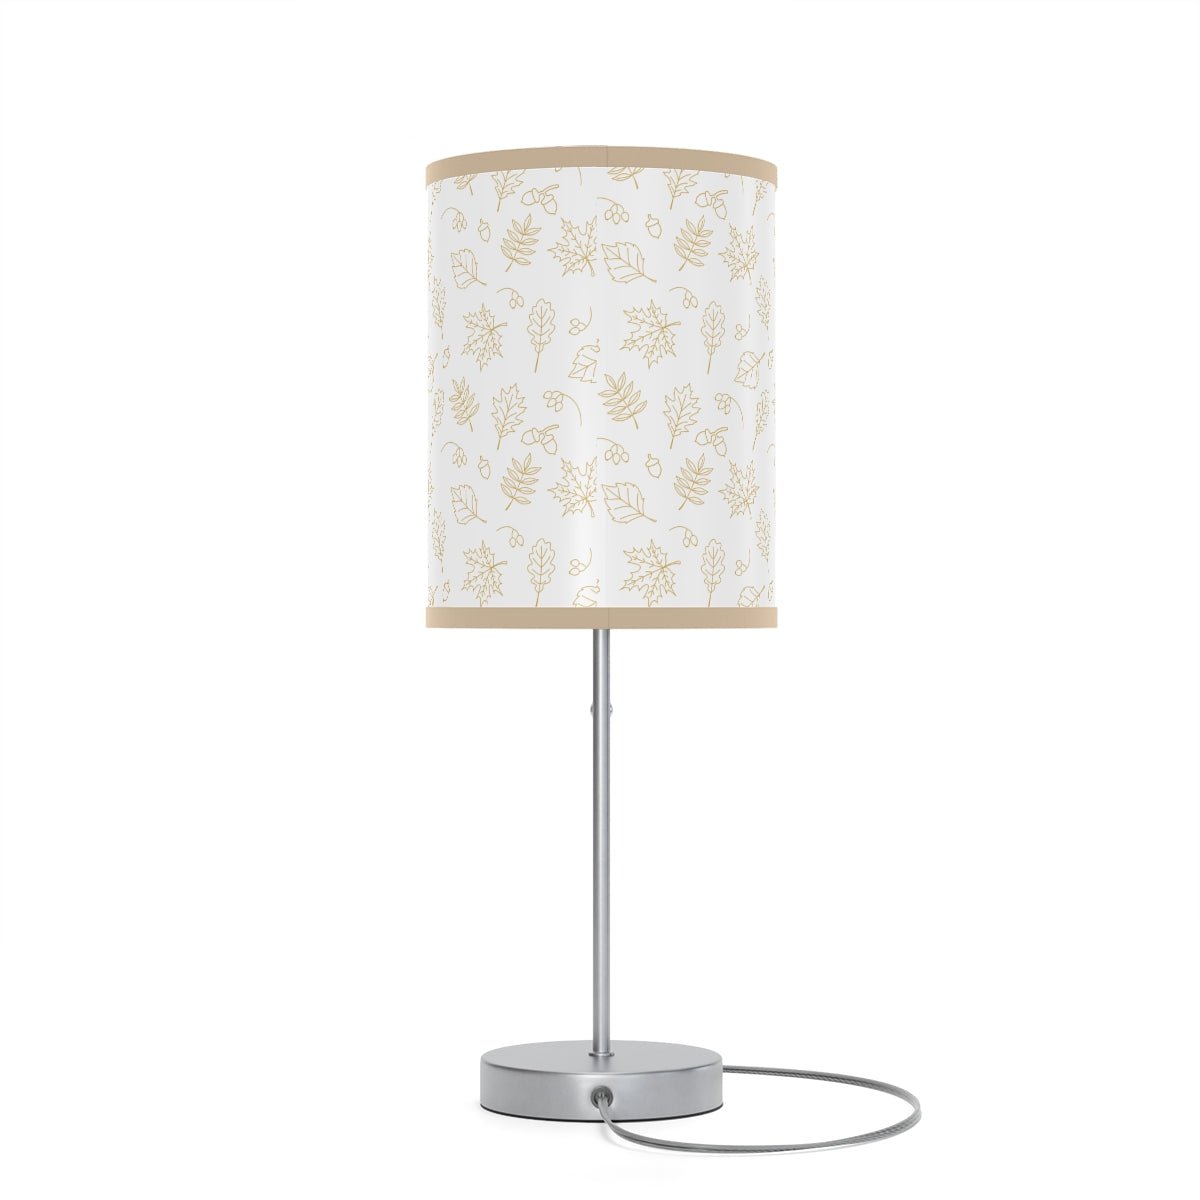 Acorns and Leaves Table Lamp - Puffin Lime